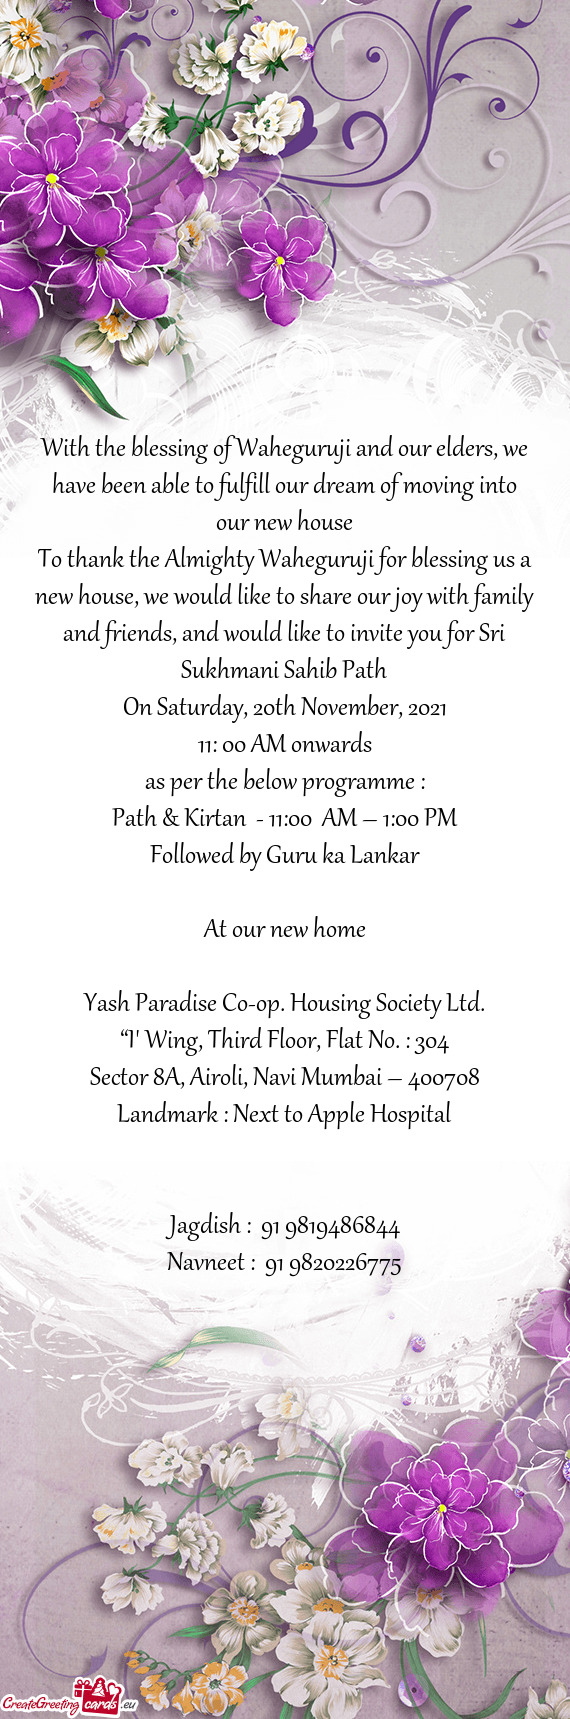 To thank the Almighty Waheguruji for blessing us a new house, we would like to share our joy with fa